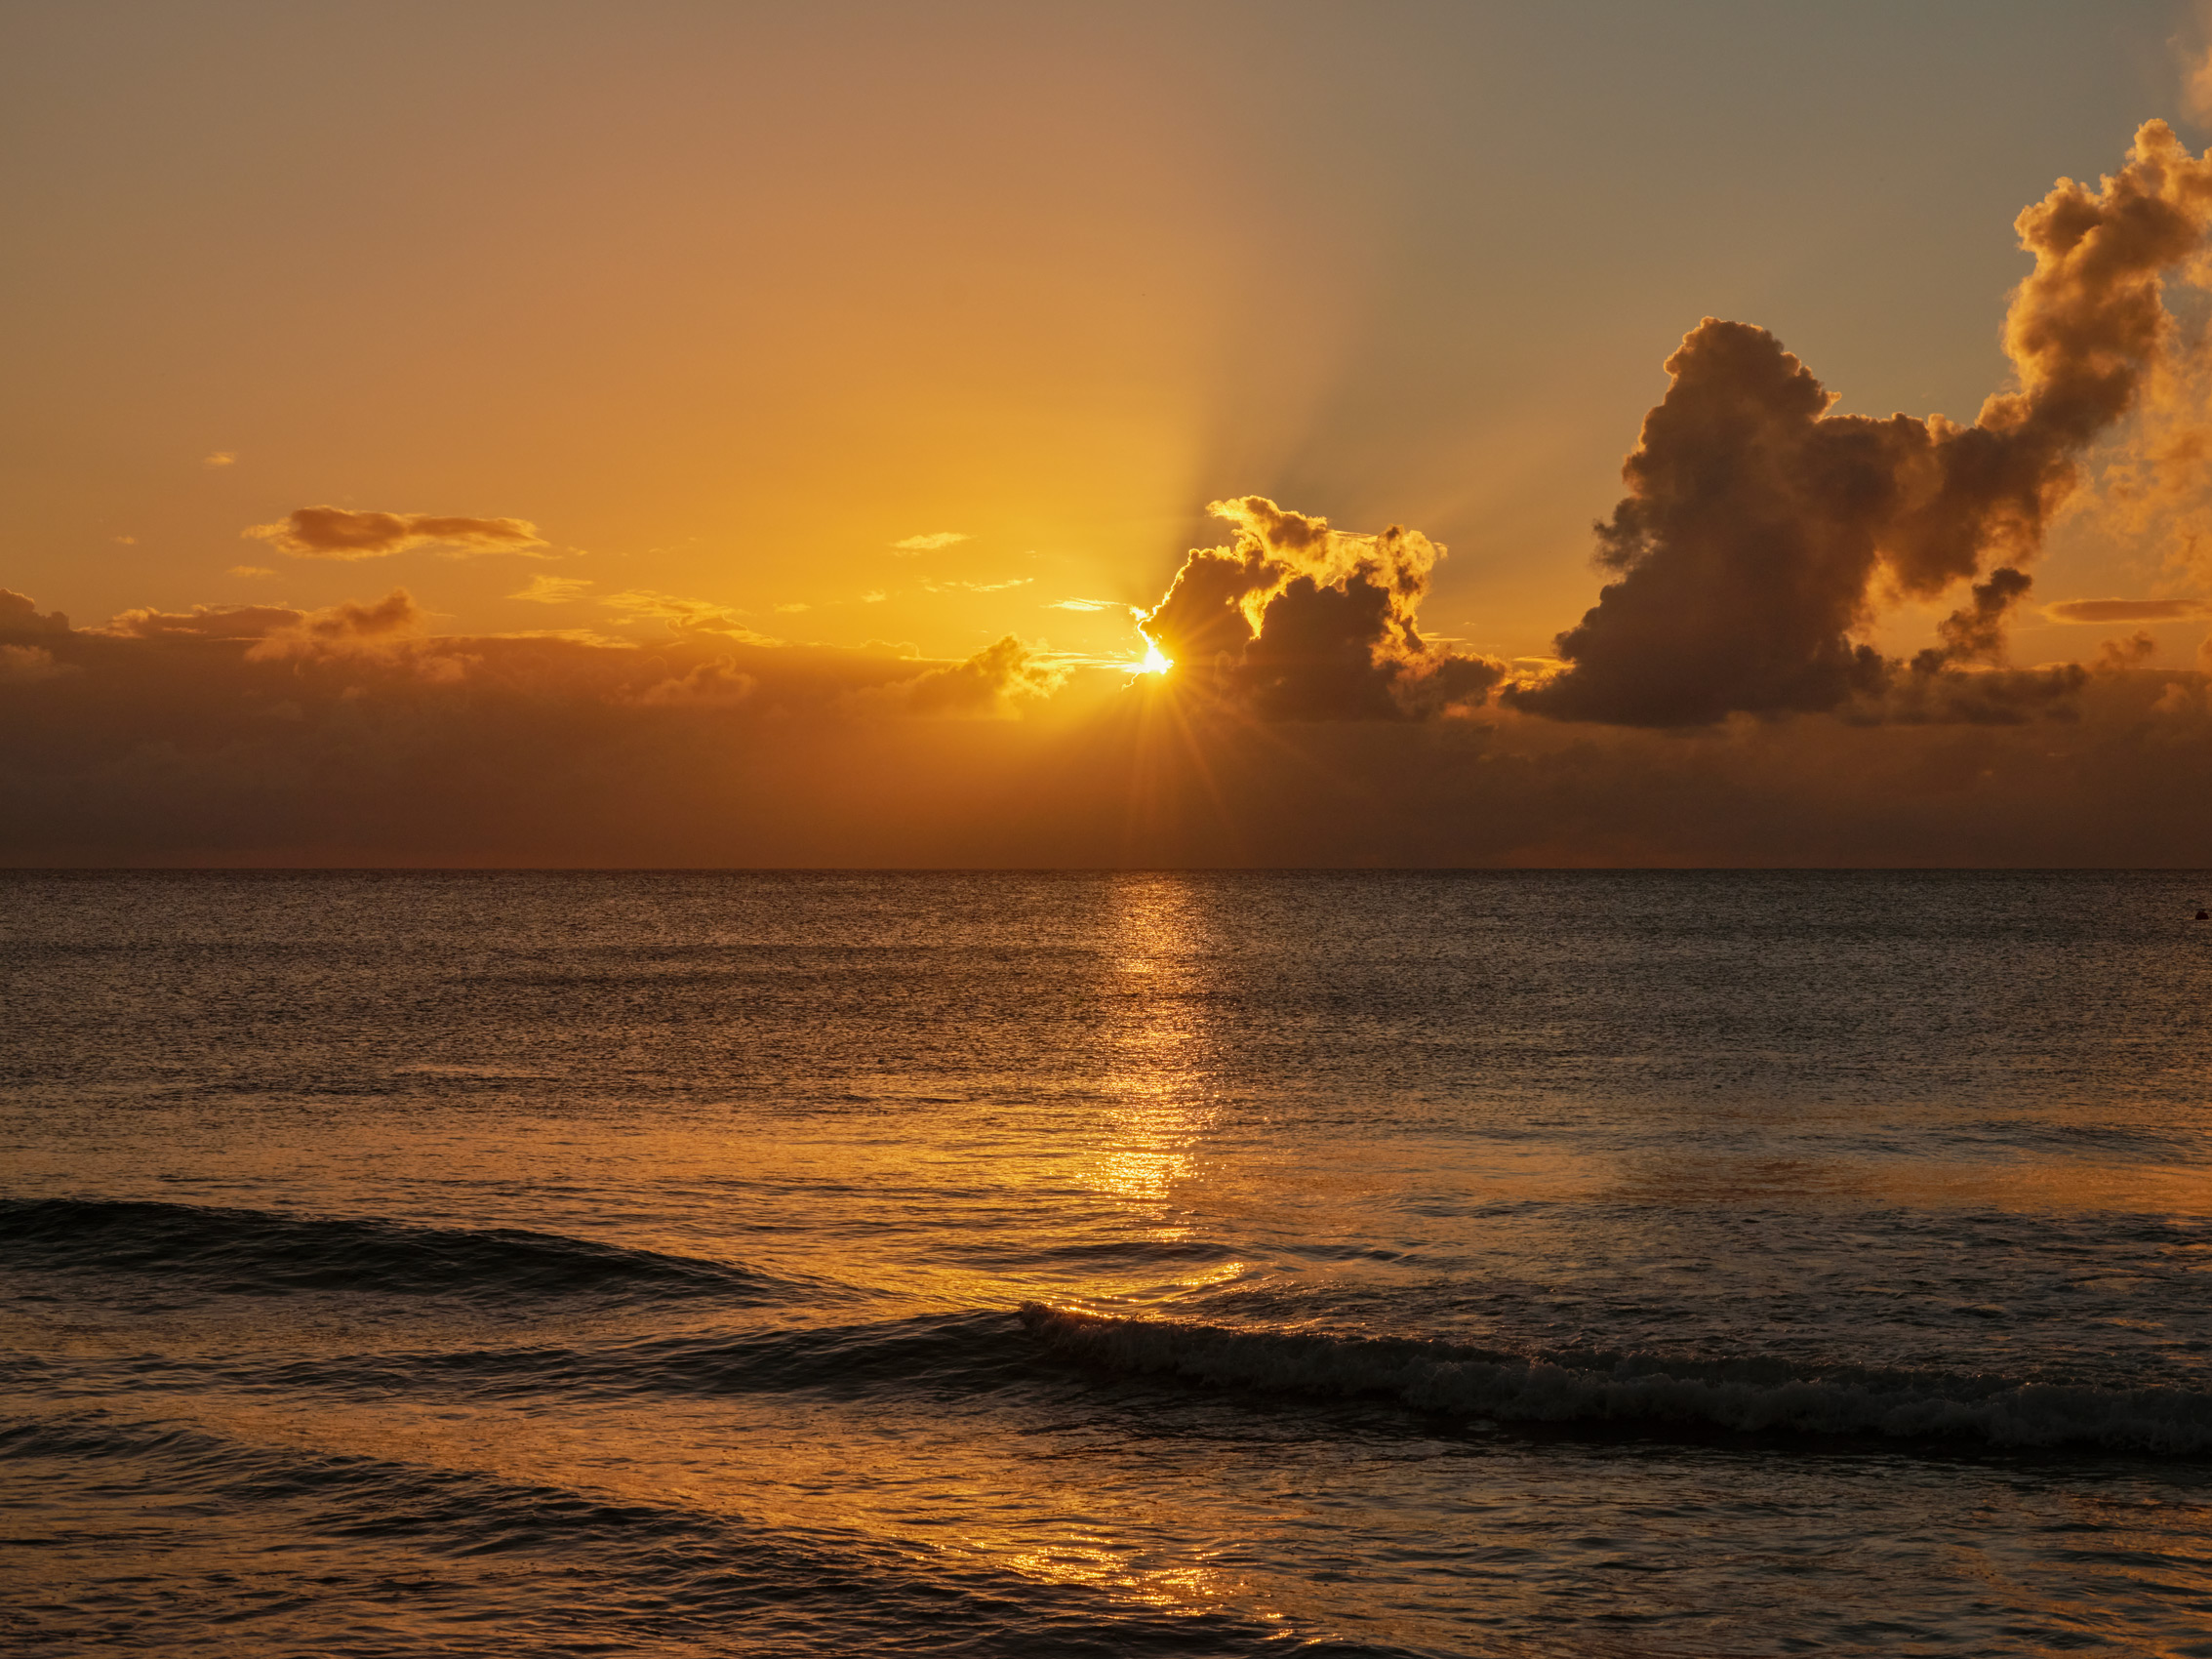 A-PERFECT-BEAUTIFUL-SUNSET-TAKES-PLACE-ON-THE-SHORE-OF-SMITONS-BAY-IN-BARBADOS